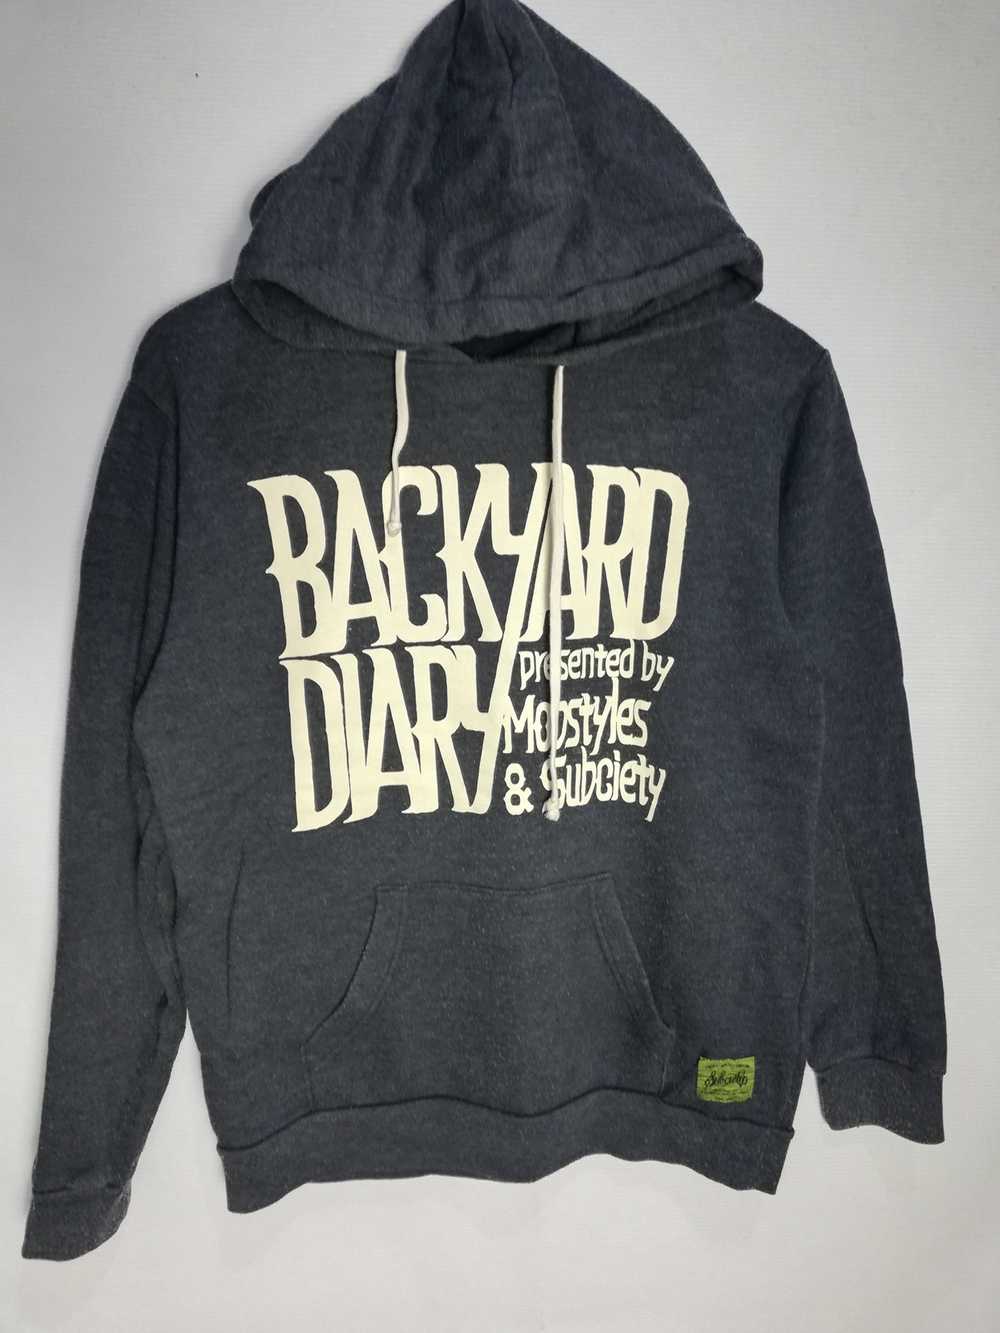 Japanese Brand backyard diary hoodie by subciety - image 3